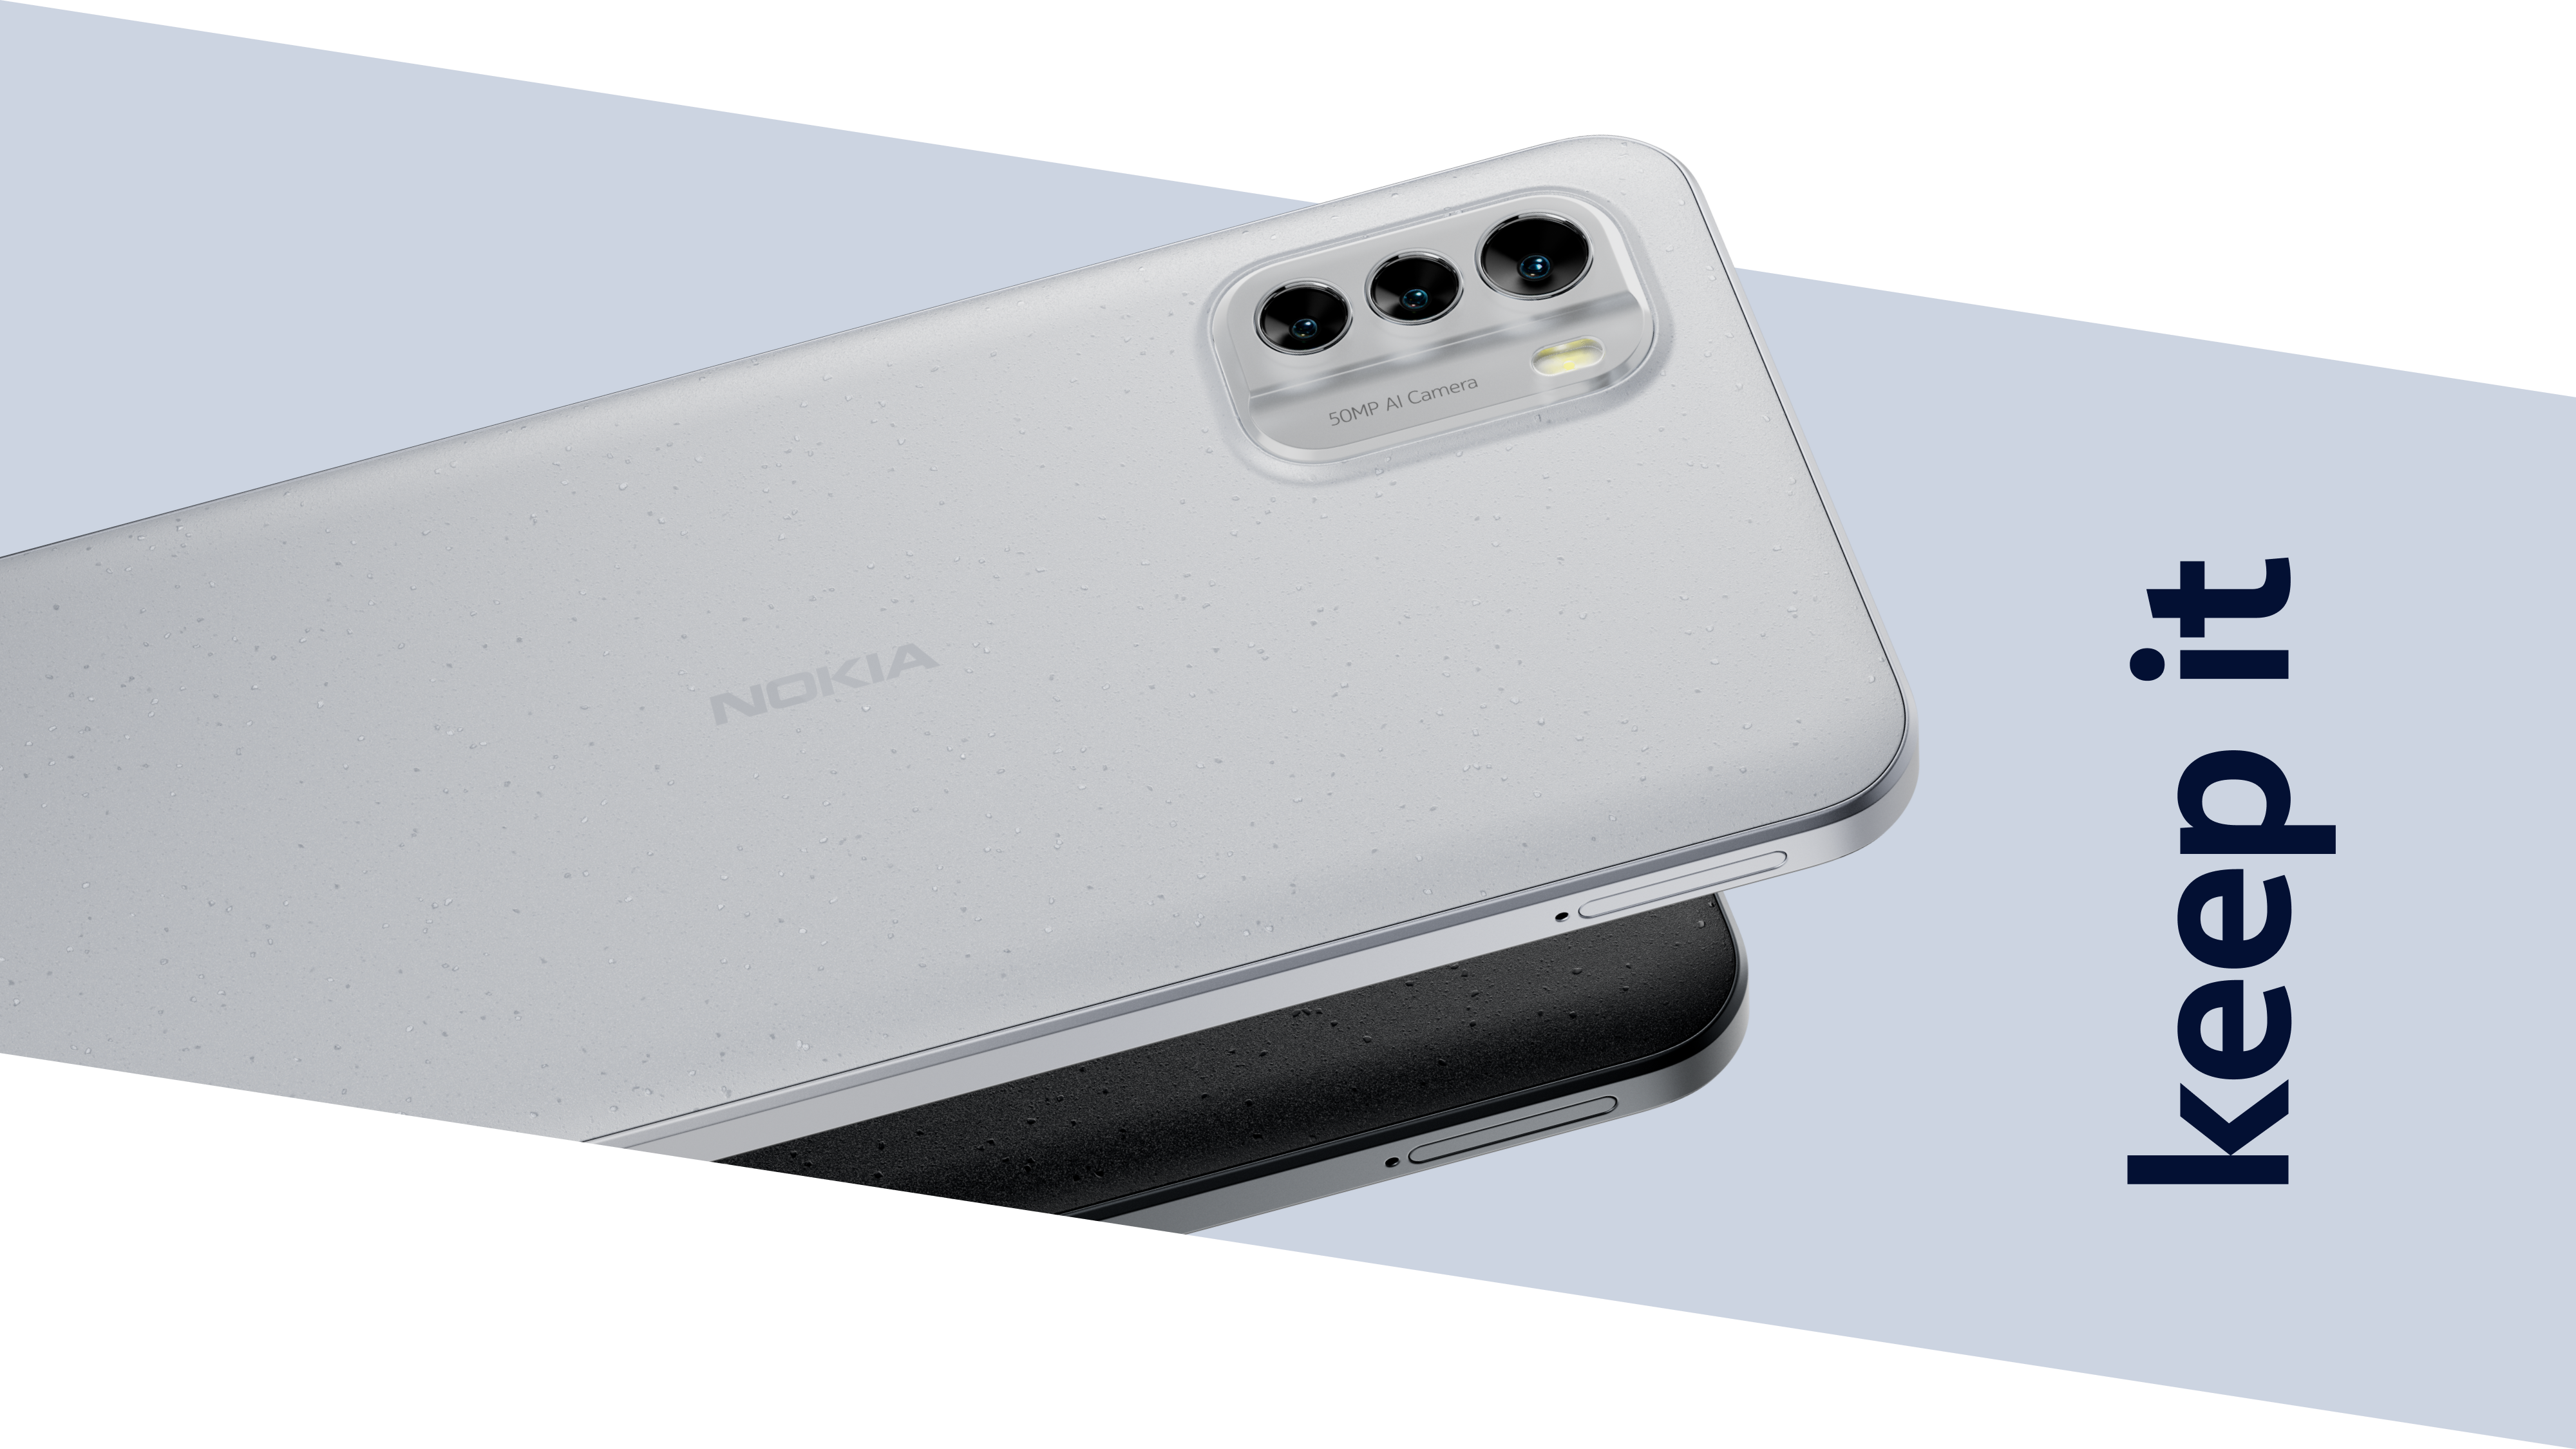 Nokia G60 5G smartphone with 50 MP triple camera